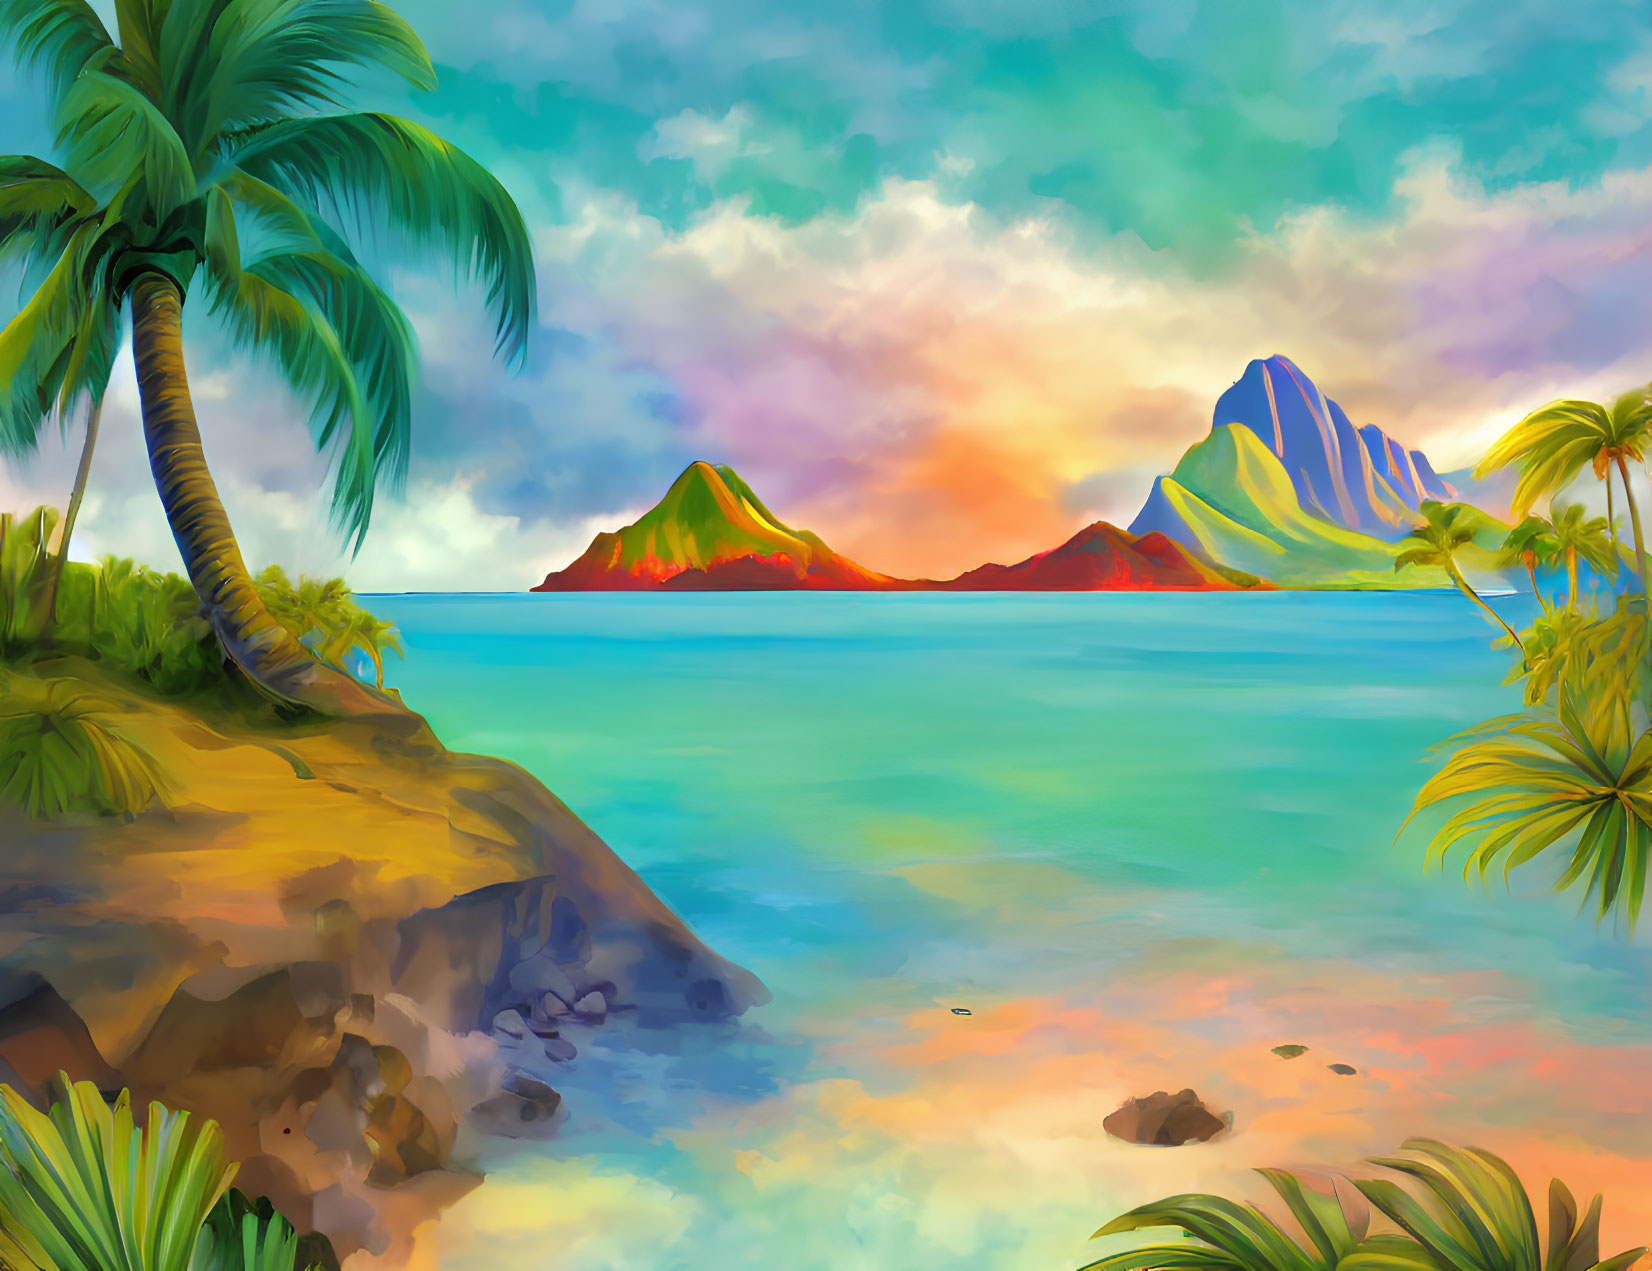 Tropical beach scene with palm trees, ocean, mountains, and sunset